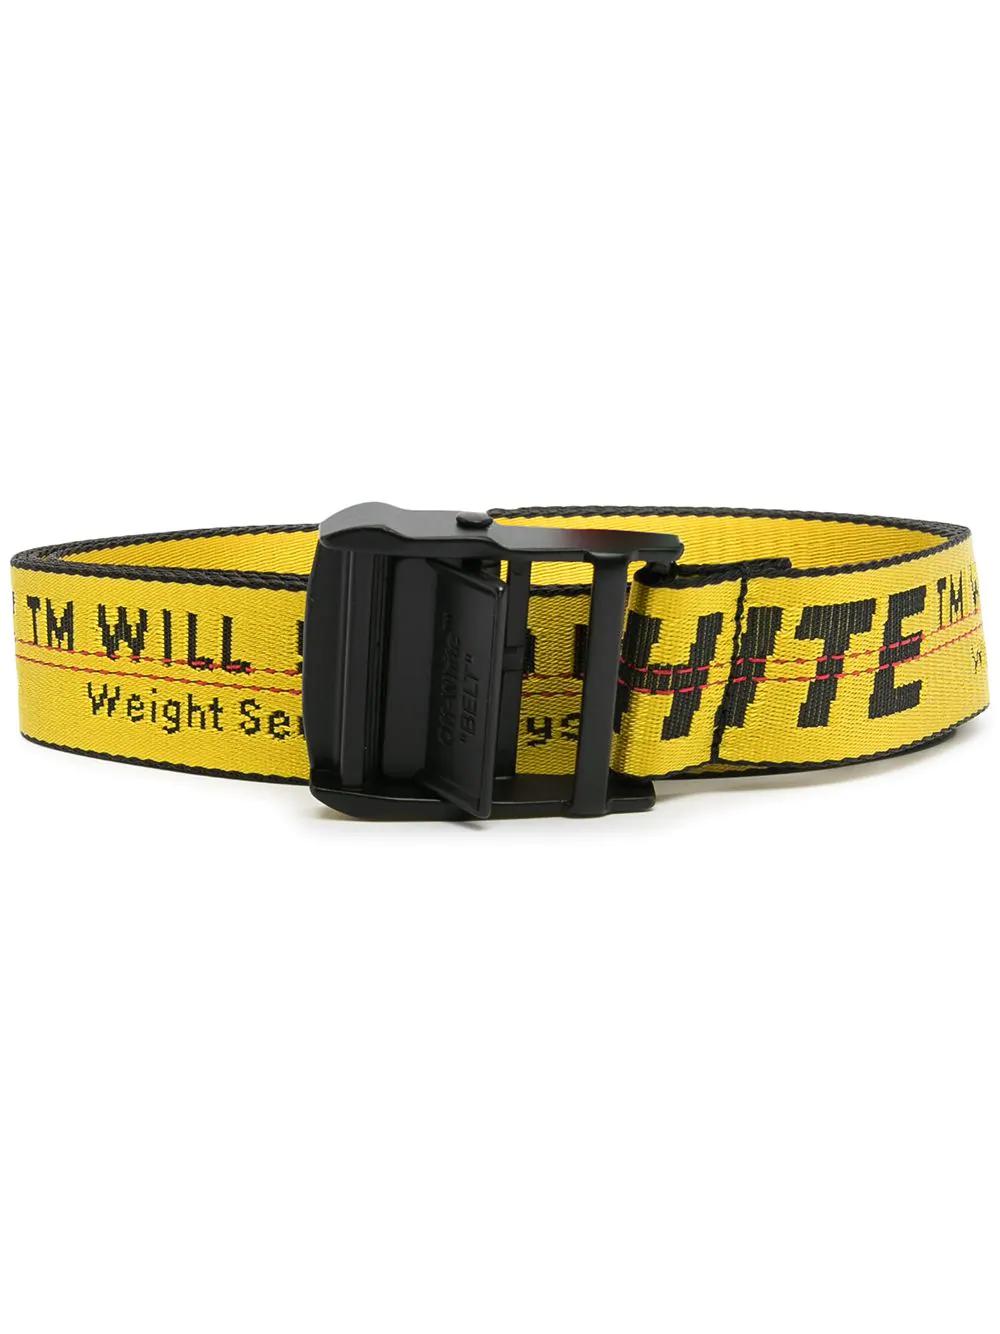 elongated Industrial belt by OFF-WHITE | jellibeans